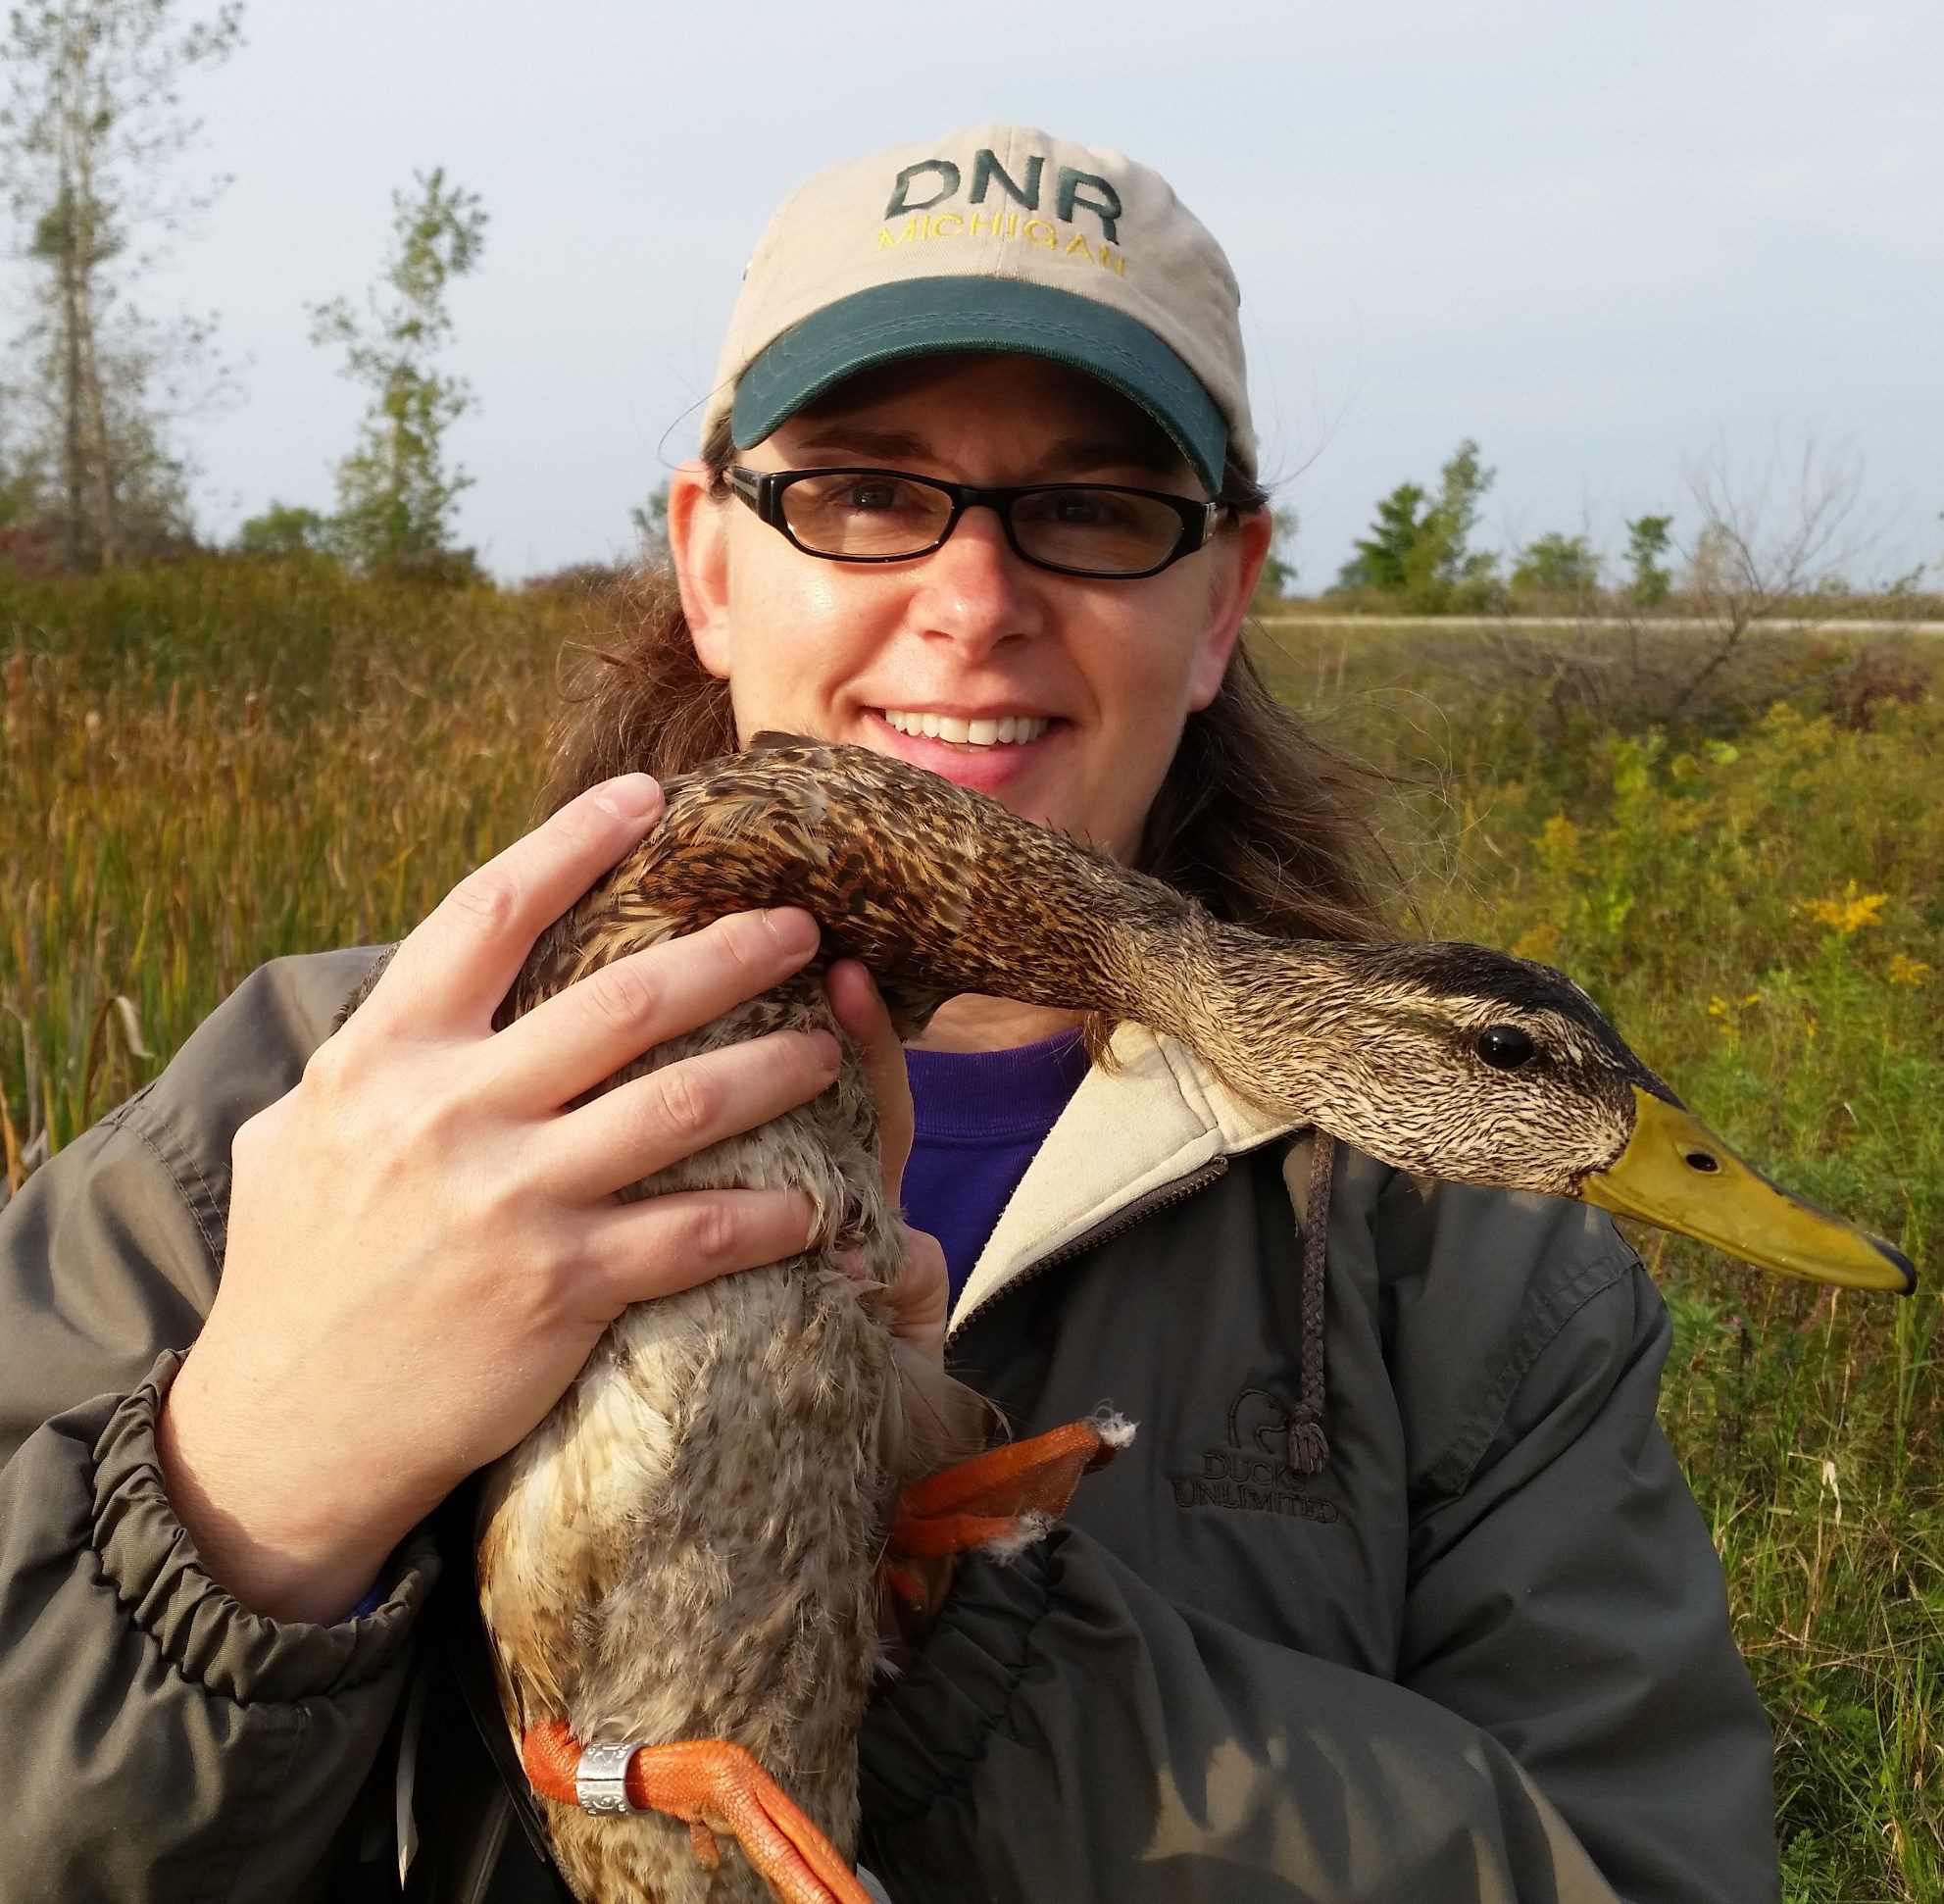 Michigan Department of Natural Resources waterfowl and wetlands specialist, Barb Avers holds a female duck up to the camera in this outdoor photo.